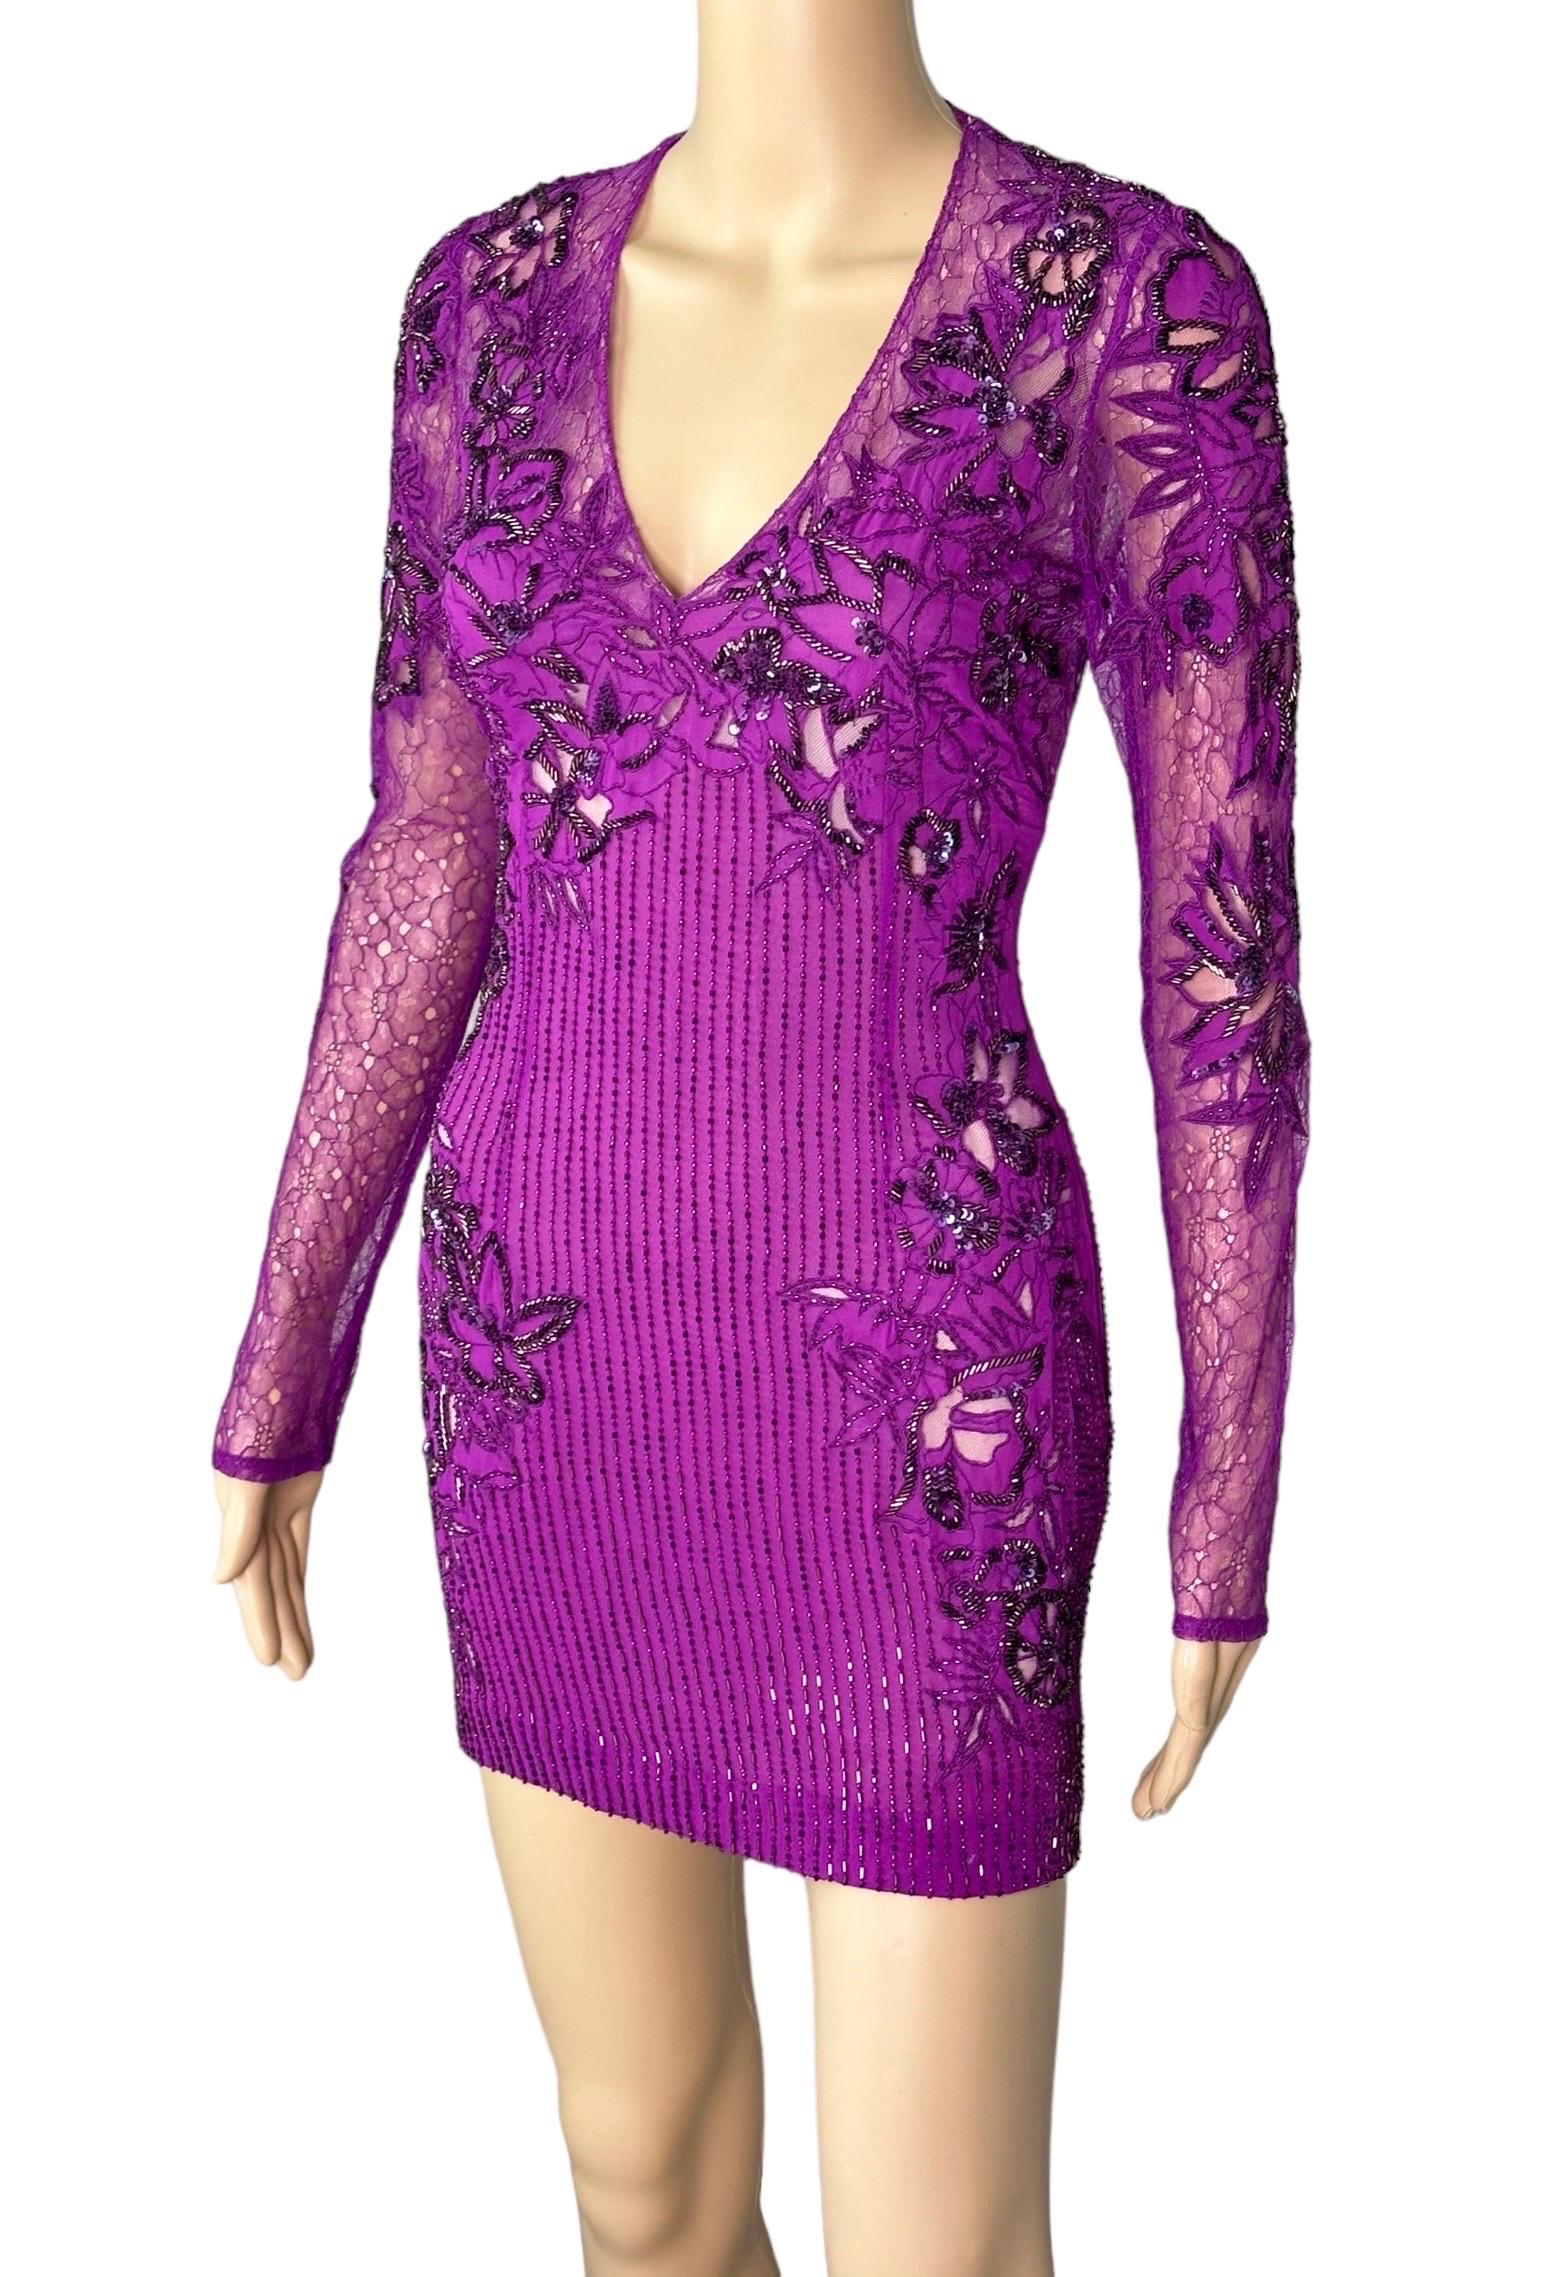 Roberto Cavalli Unworn S/S 2016 Embellished Sheer Lace Mesh Mini Dress In New Condition For Sale In Naples, FL